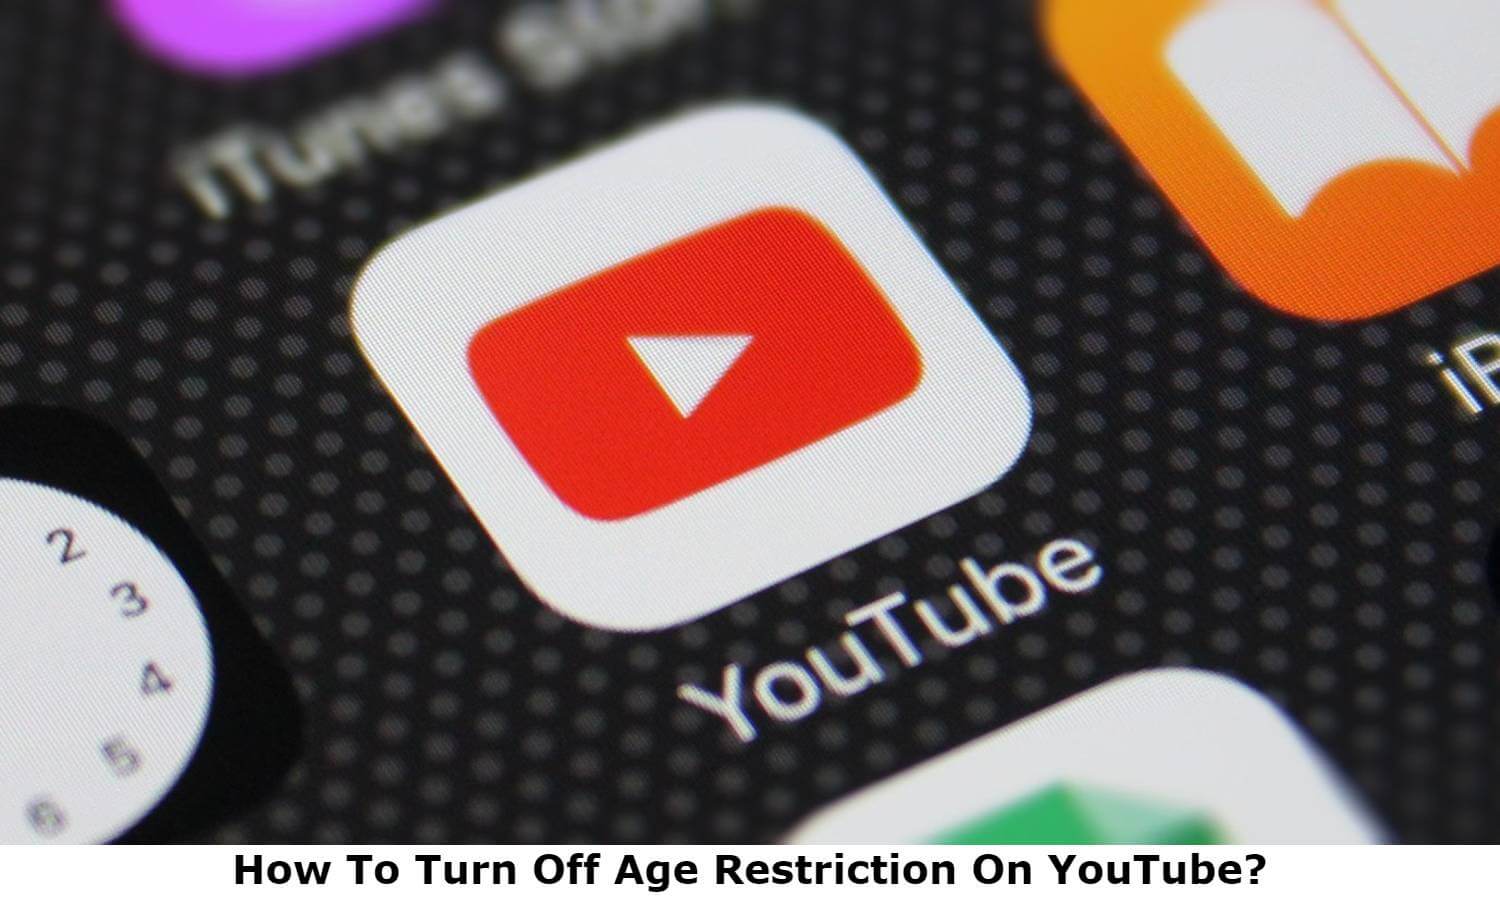 How To Turn Off Age Restriction On YouTube?